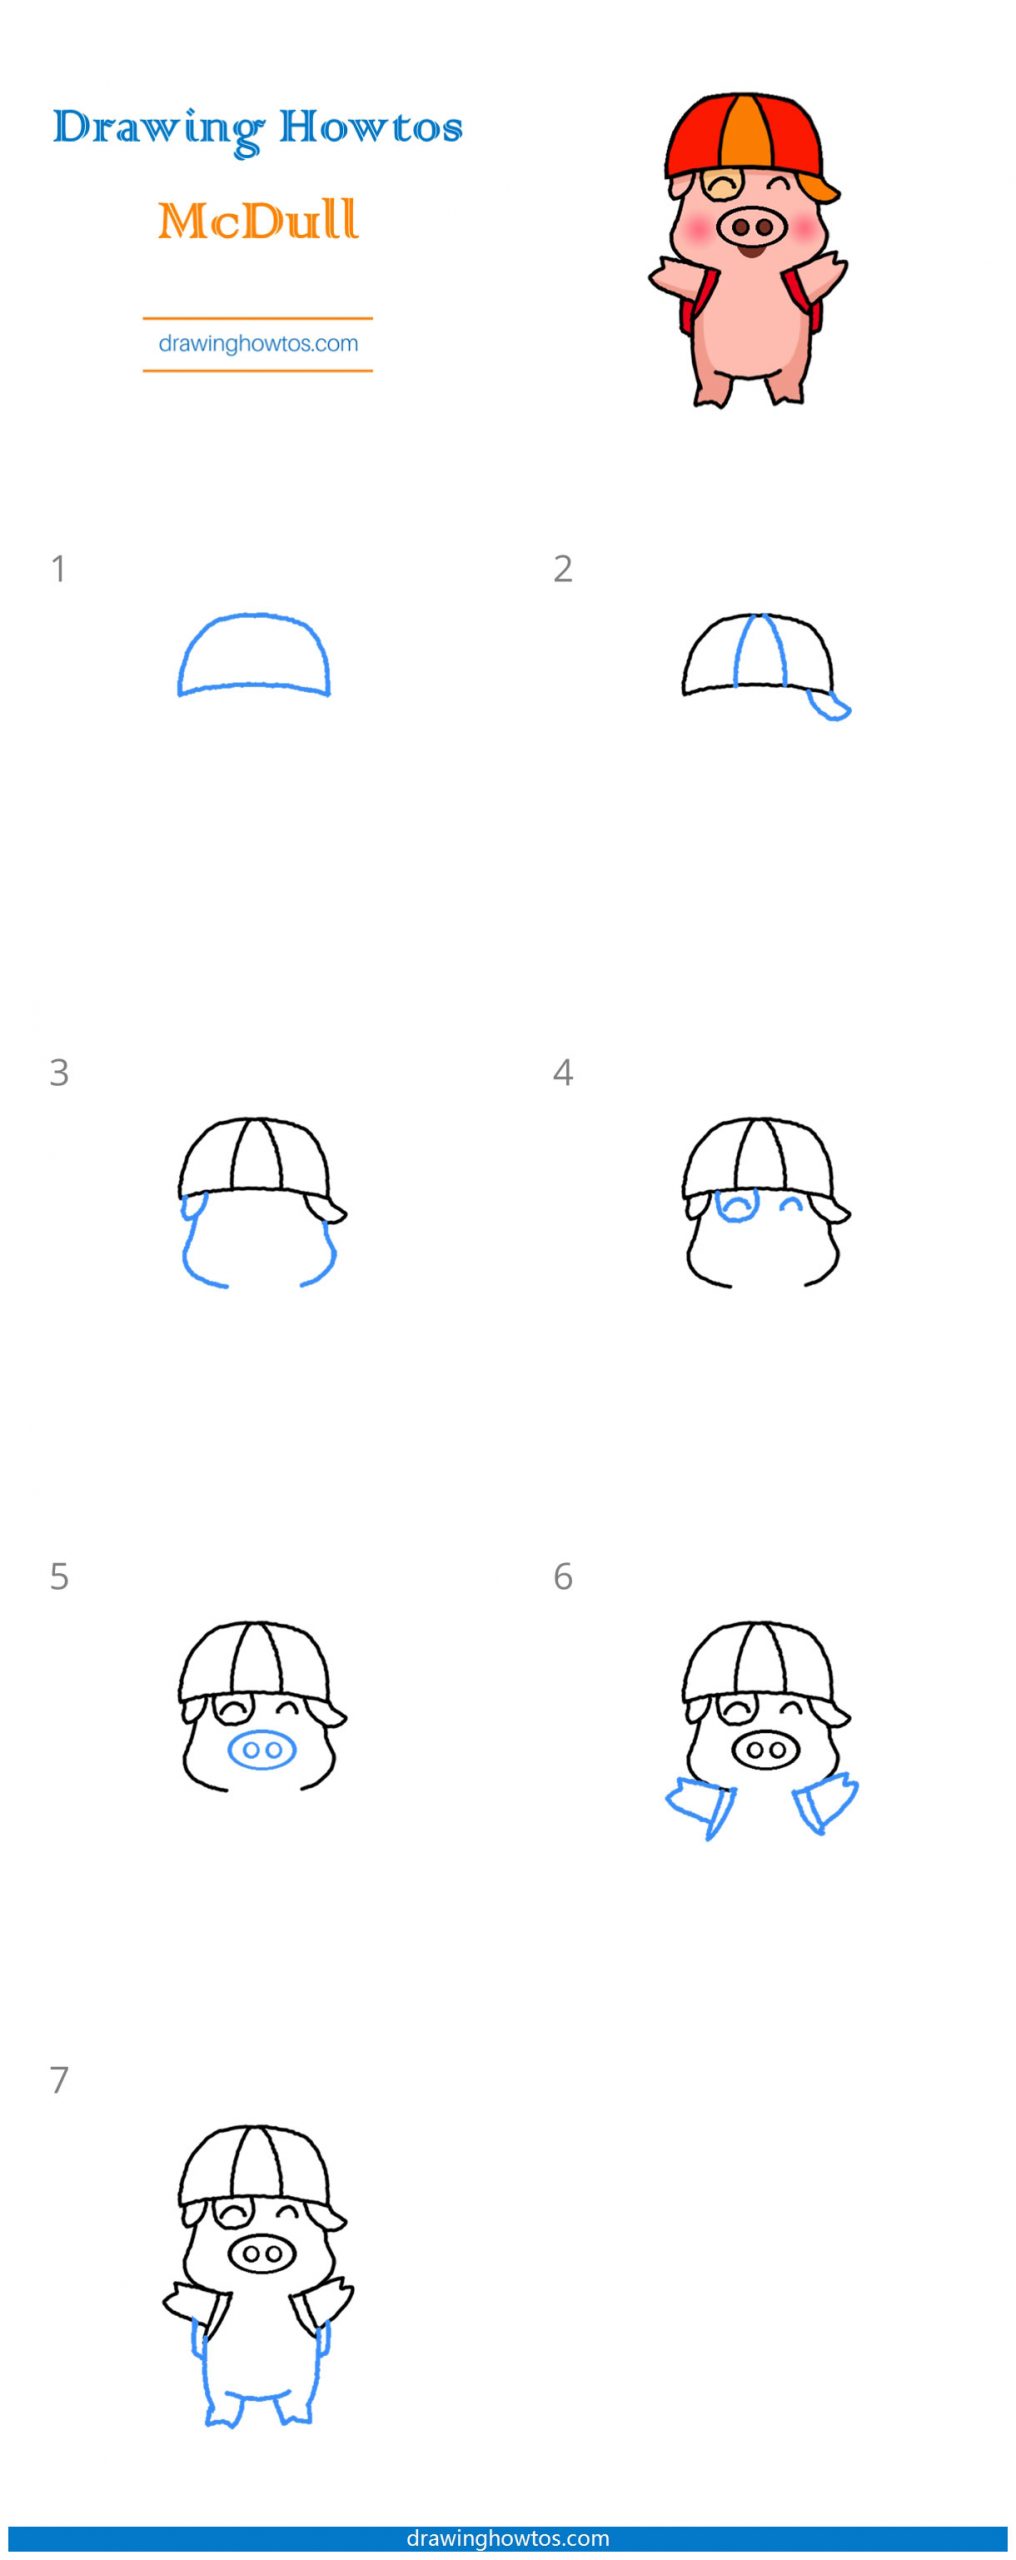 How to Draw Mcdull Step by Step